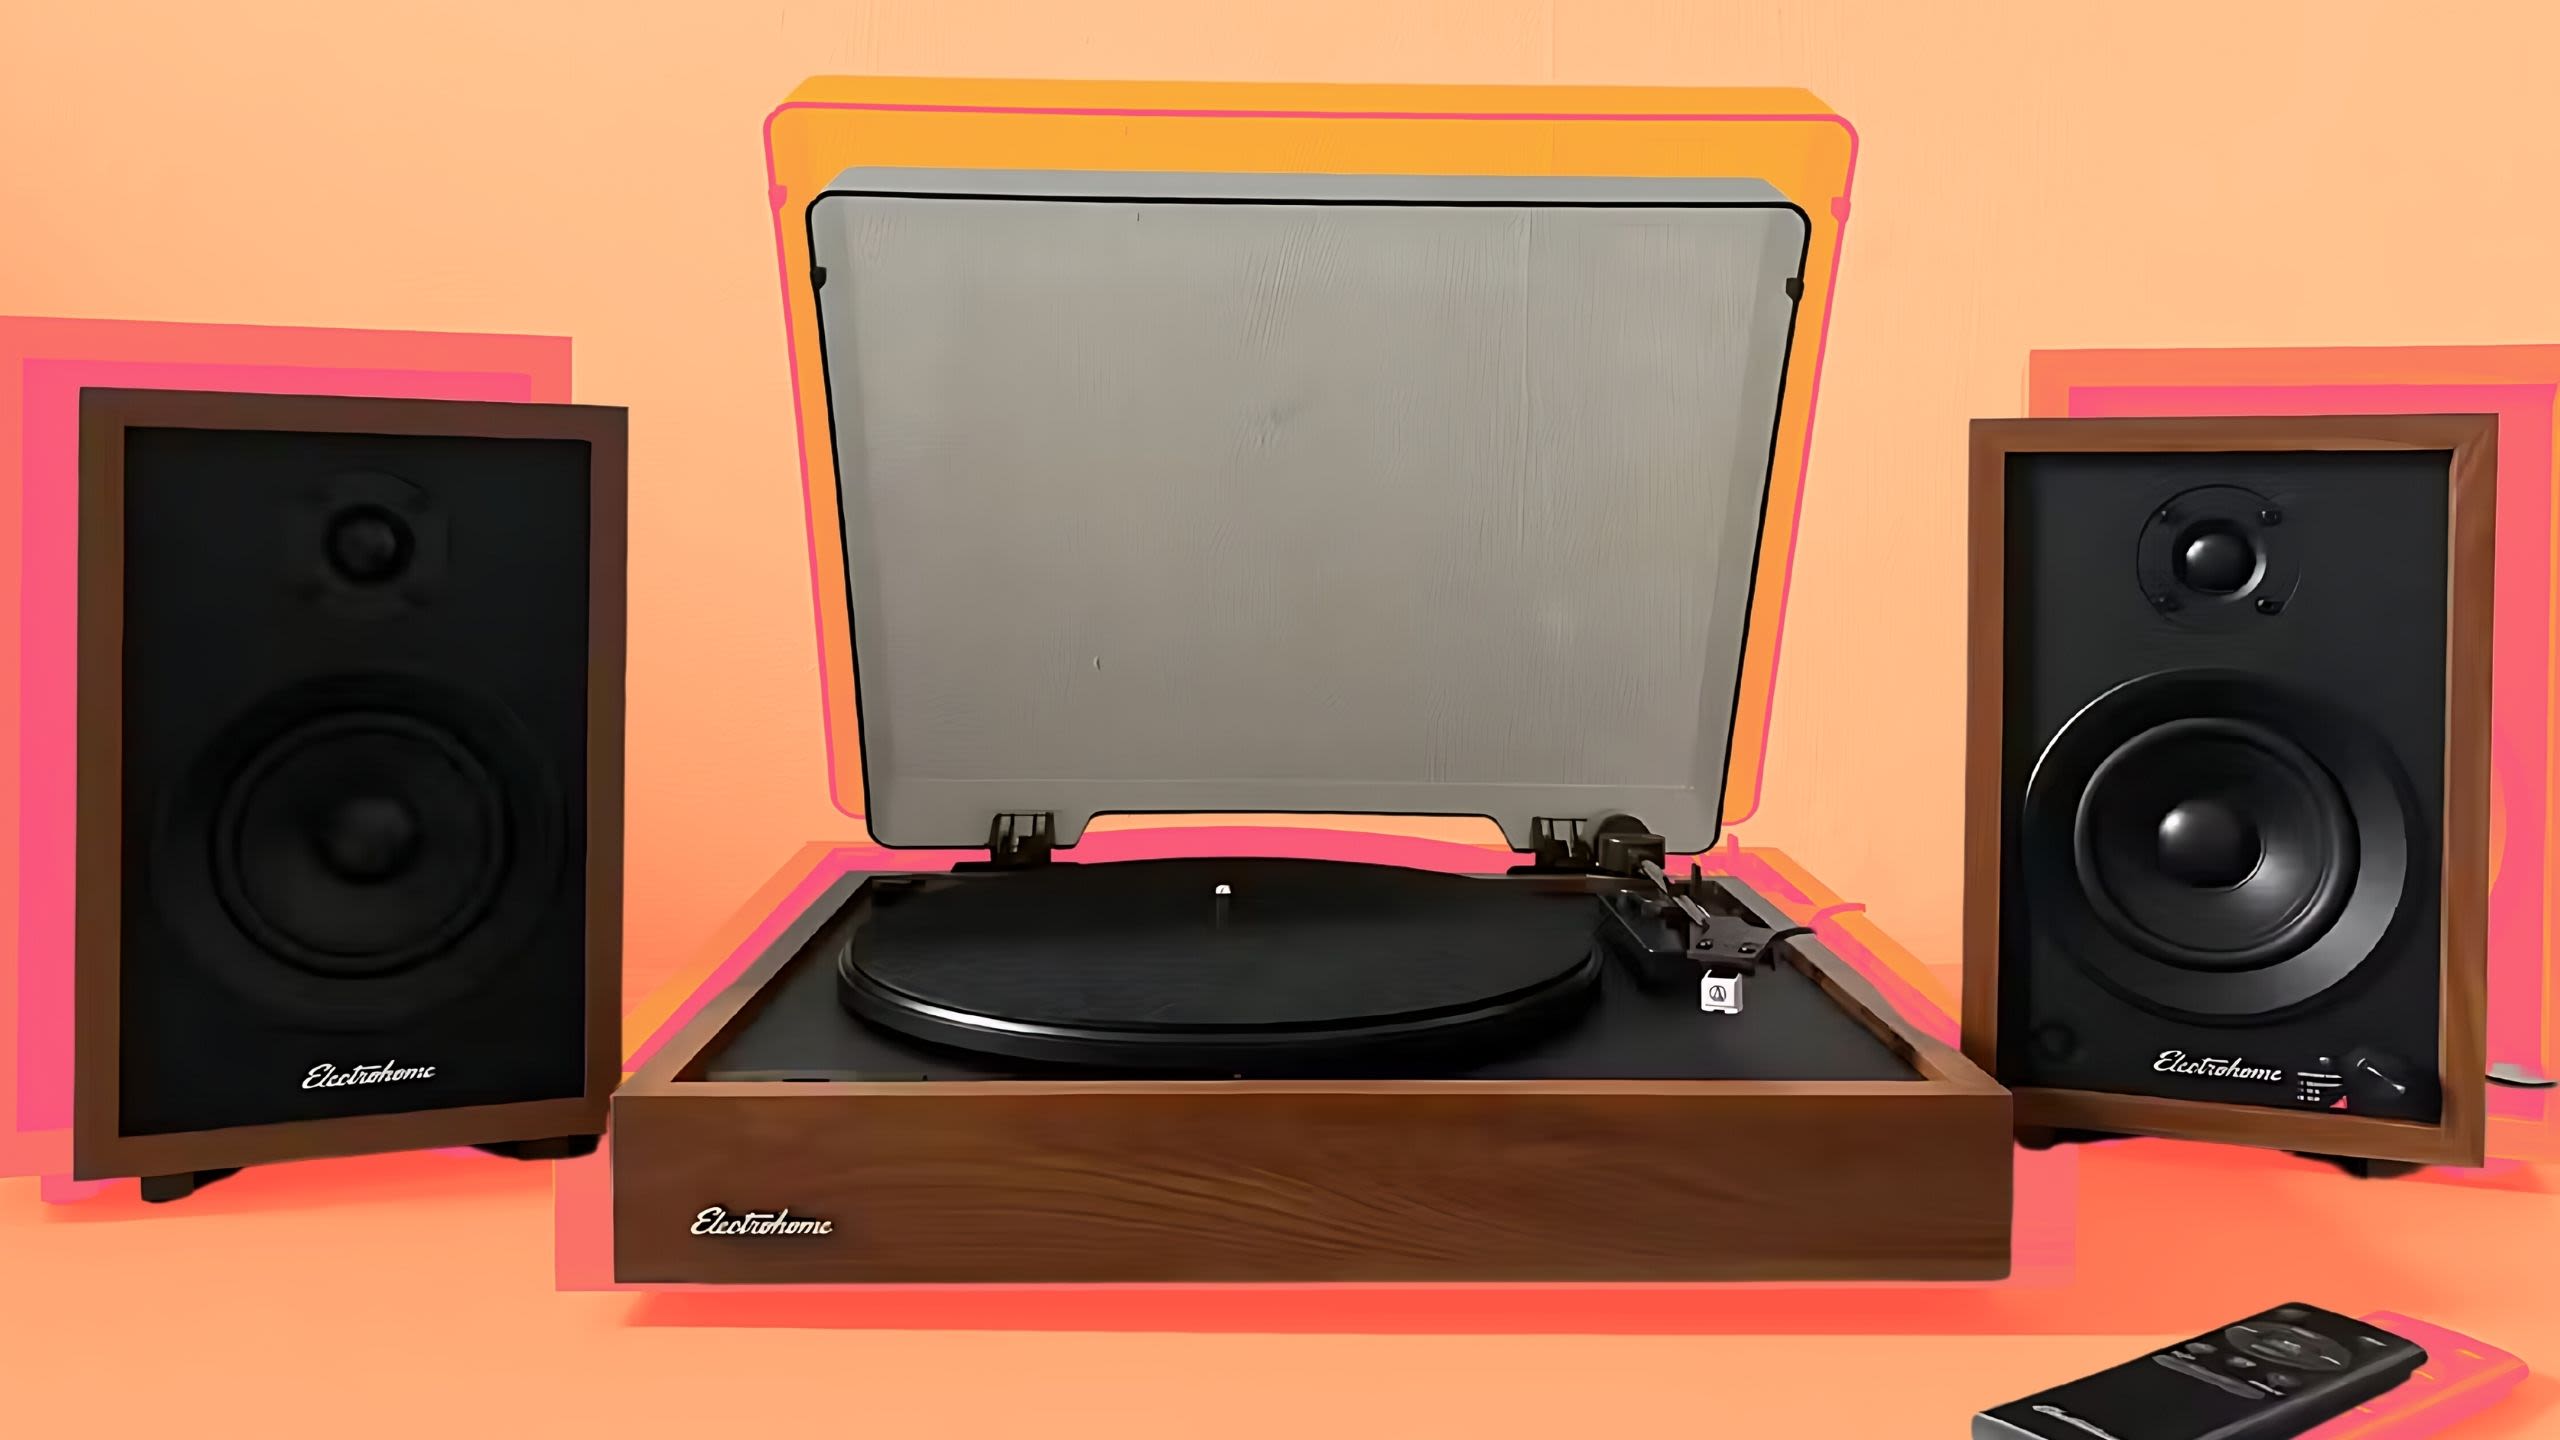 I fell in love with the vintage feel of this modern record player and speaker set